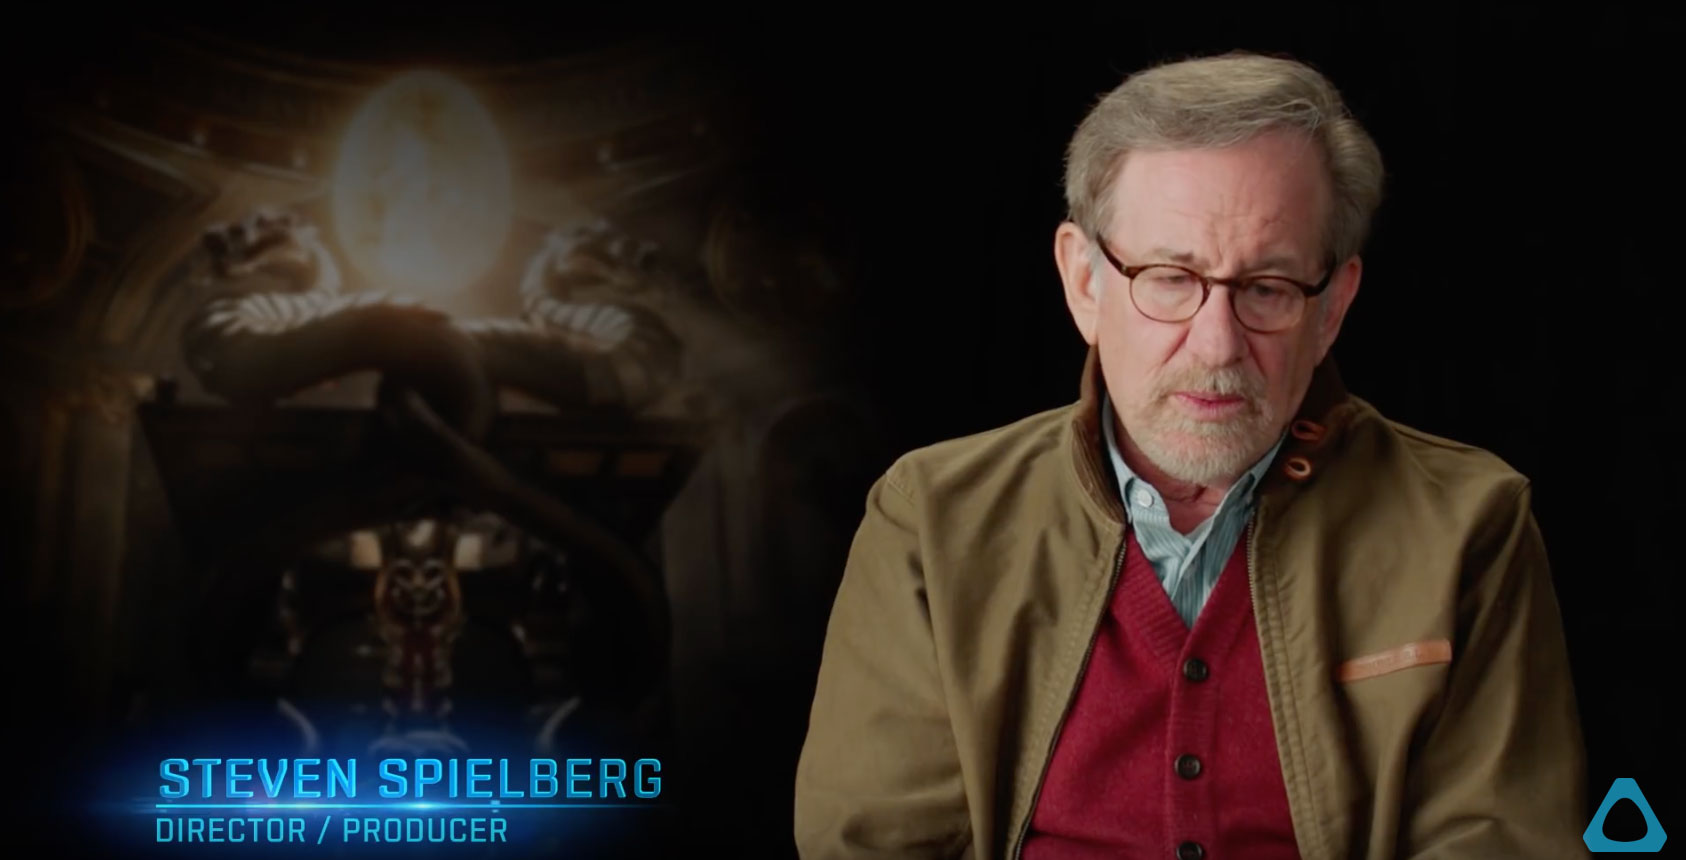 READY PLAYER ONE - Spielberg utilizing VIVE In The Film-making Process